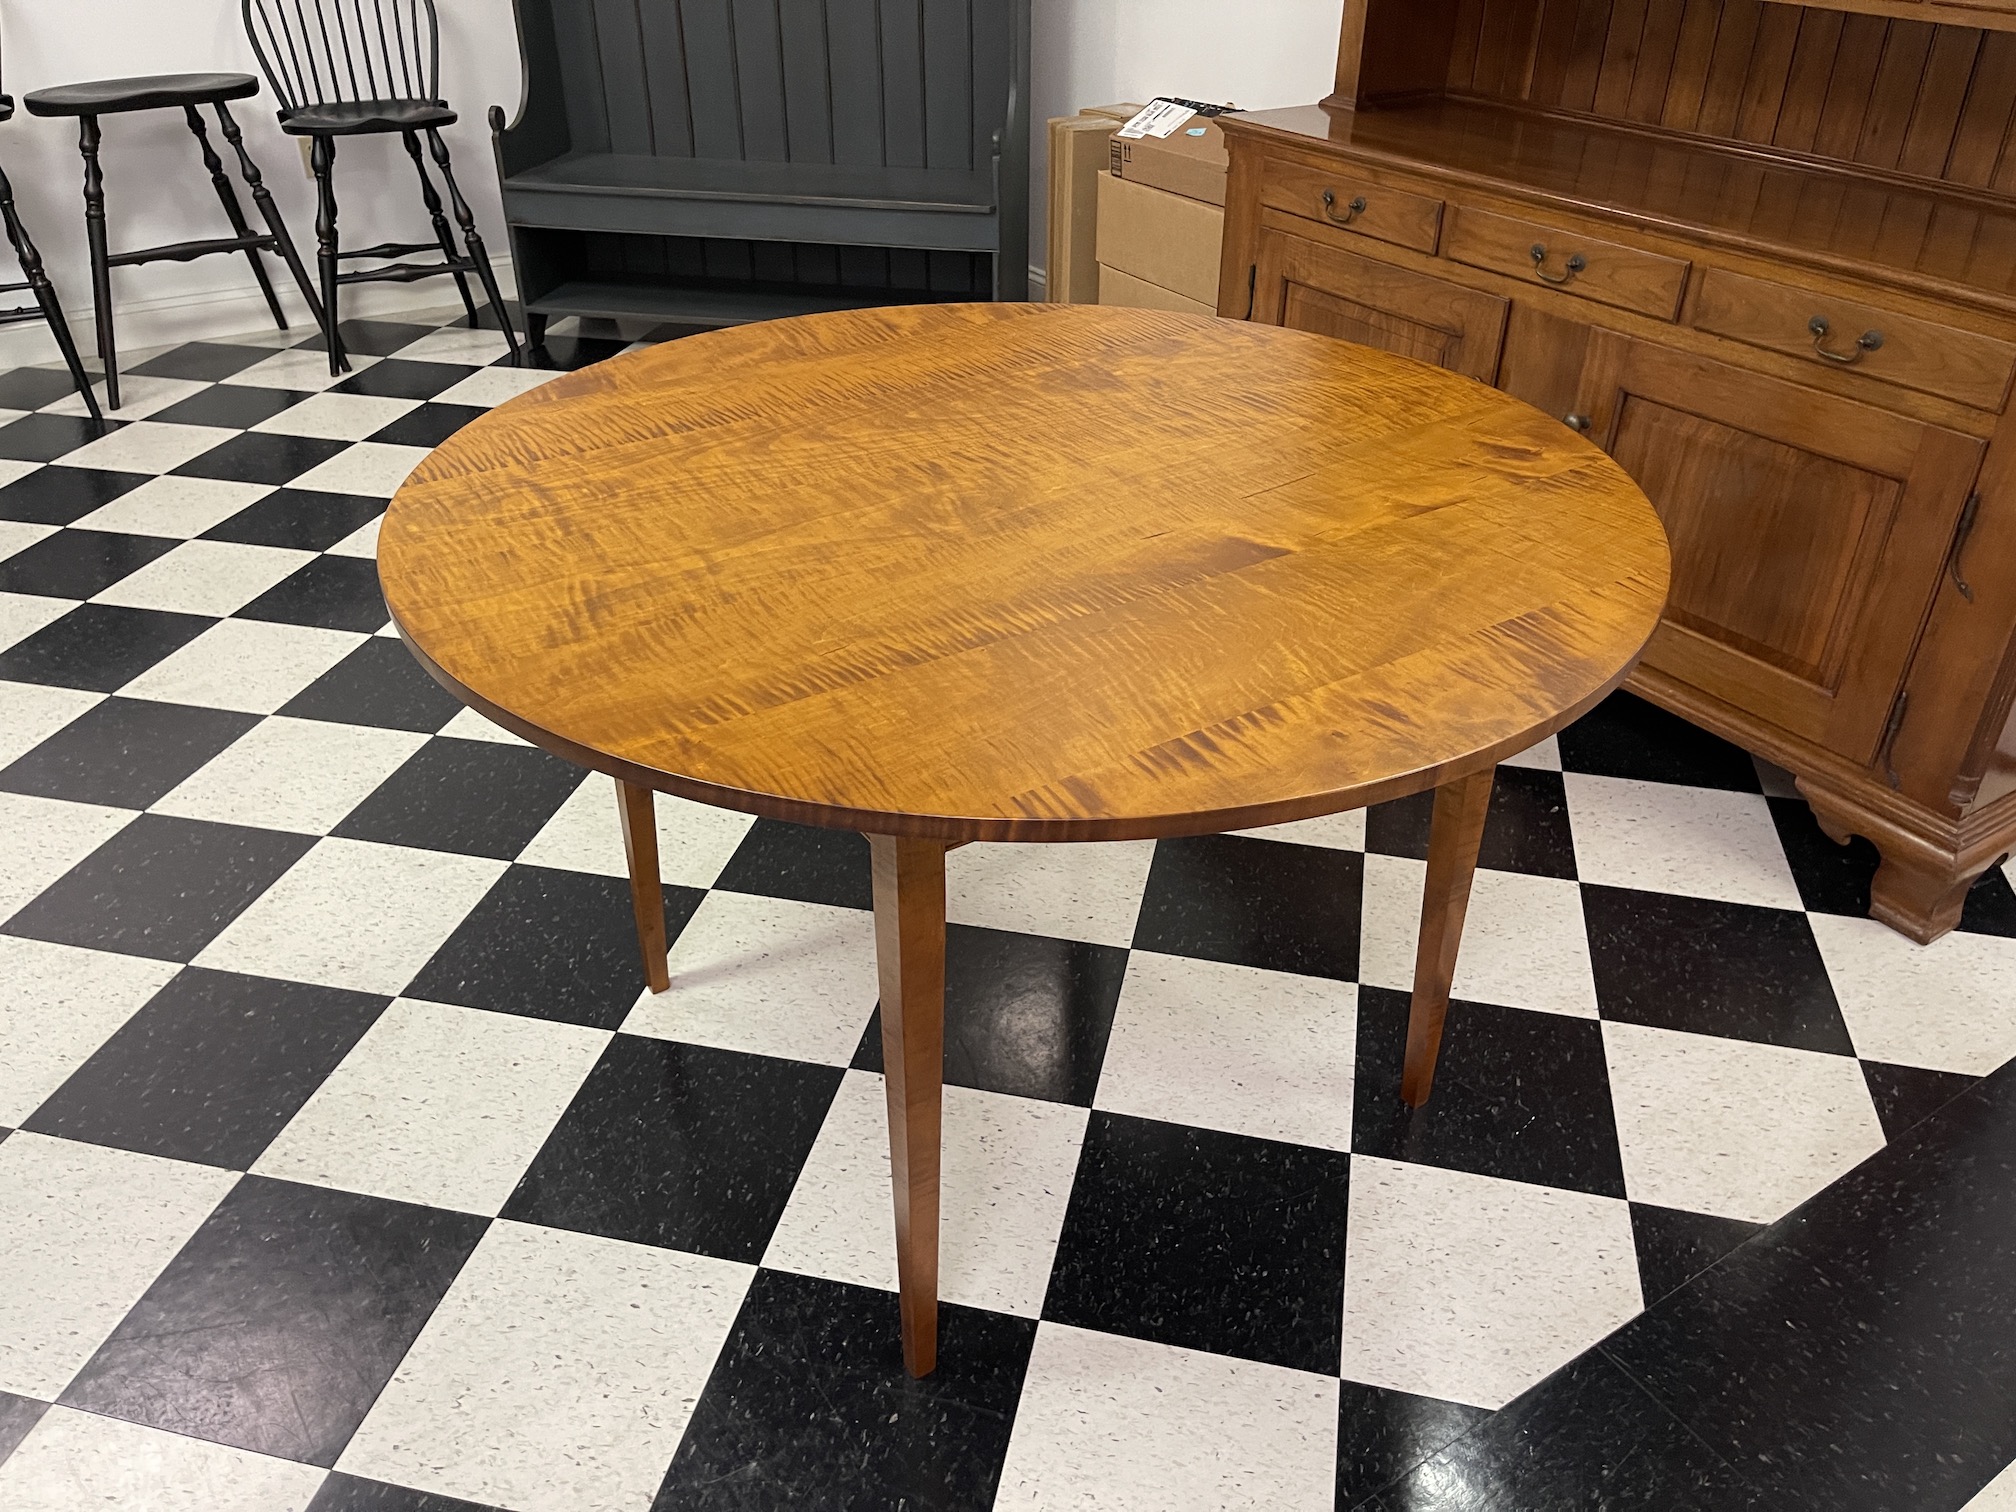 Tiger Maple Wood - New Model 48in Round Shaker Table Image